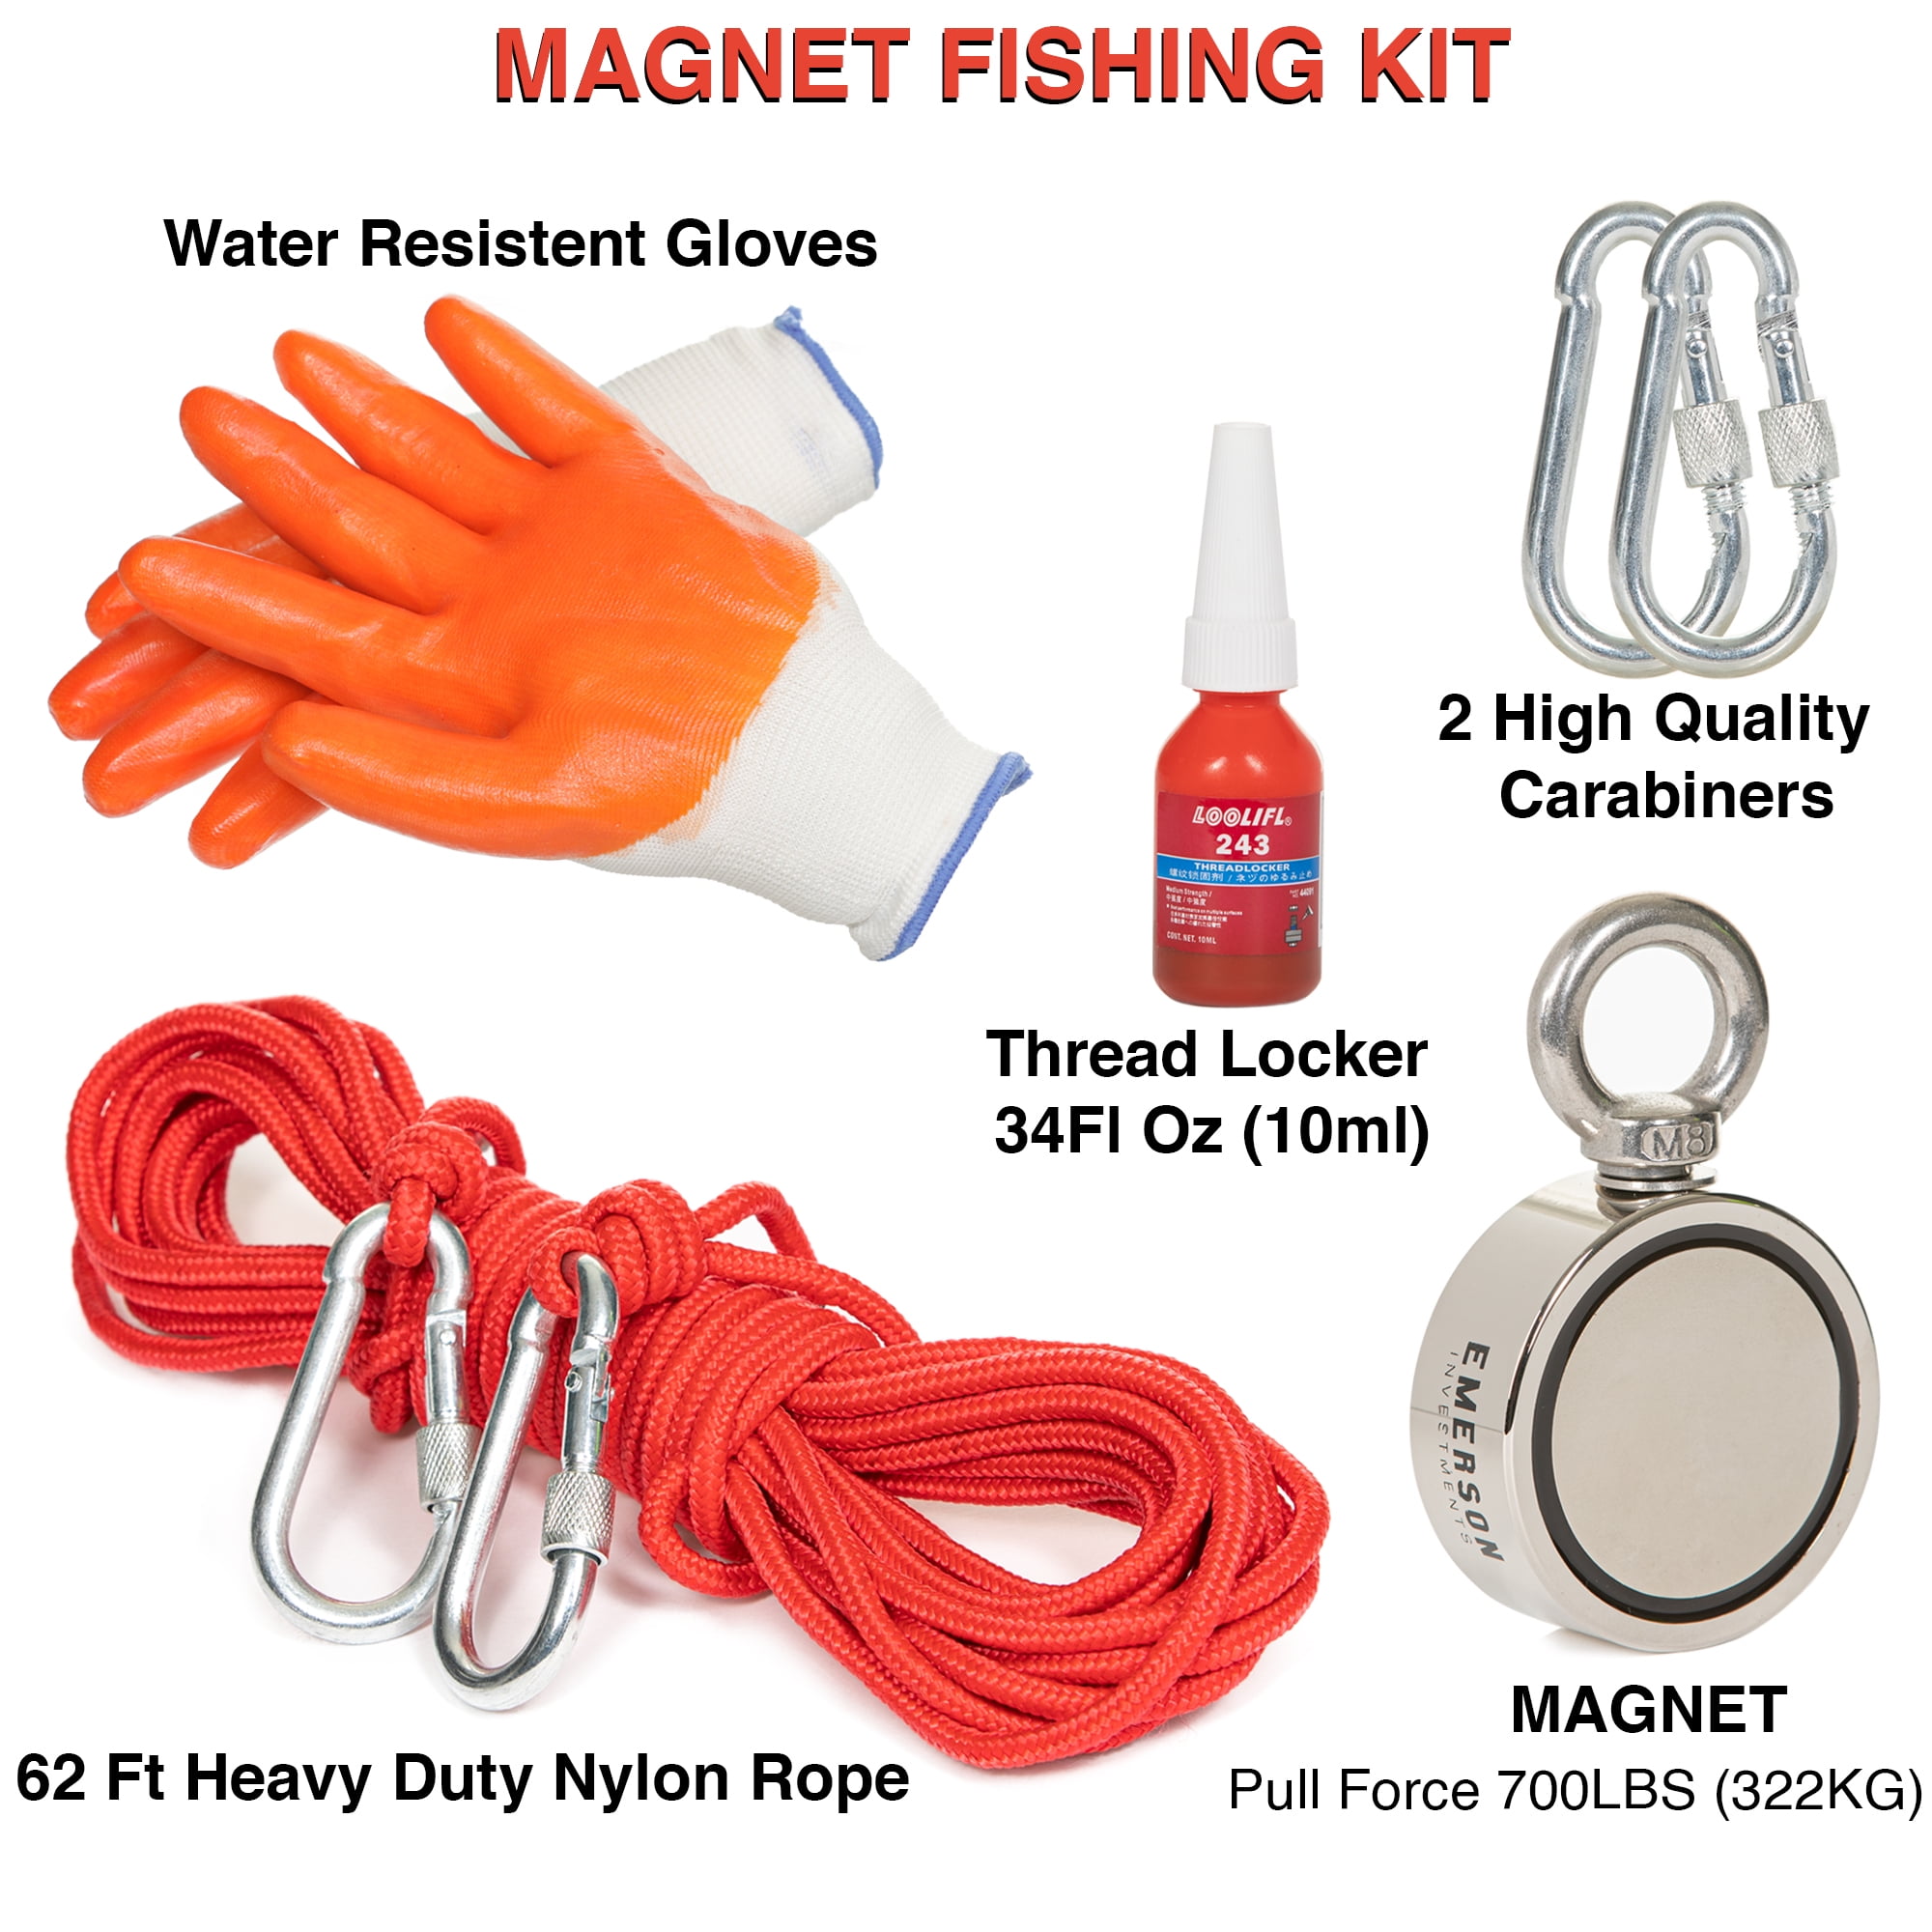 595 lb Powerful Fishing Magnet with Rope Rivers The Complete Magnetic Fishing Kit for Lakes Whalefin Fishing Magnet Kit for Explorers Deep Sea User Guide